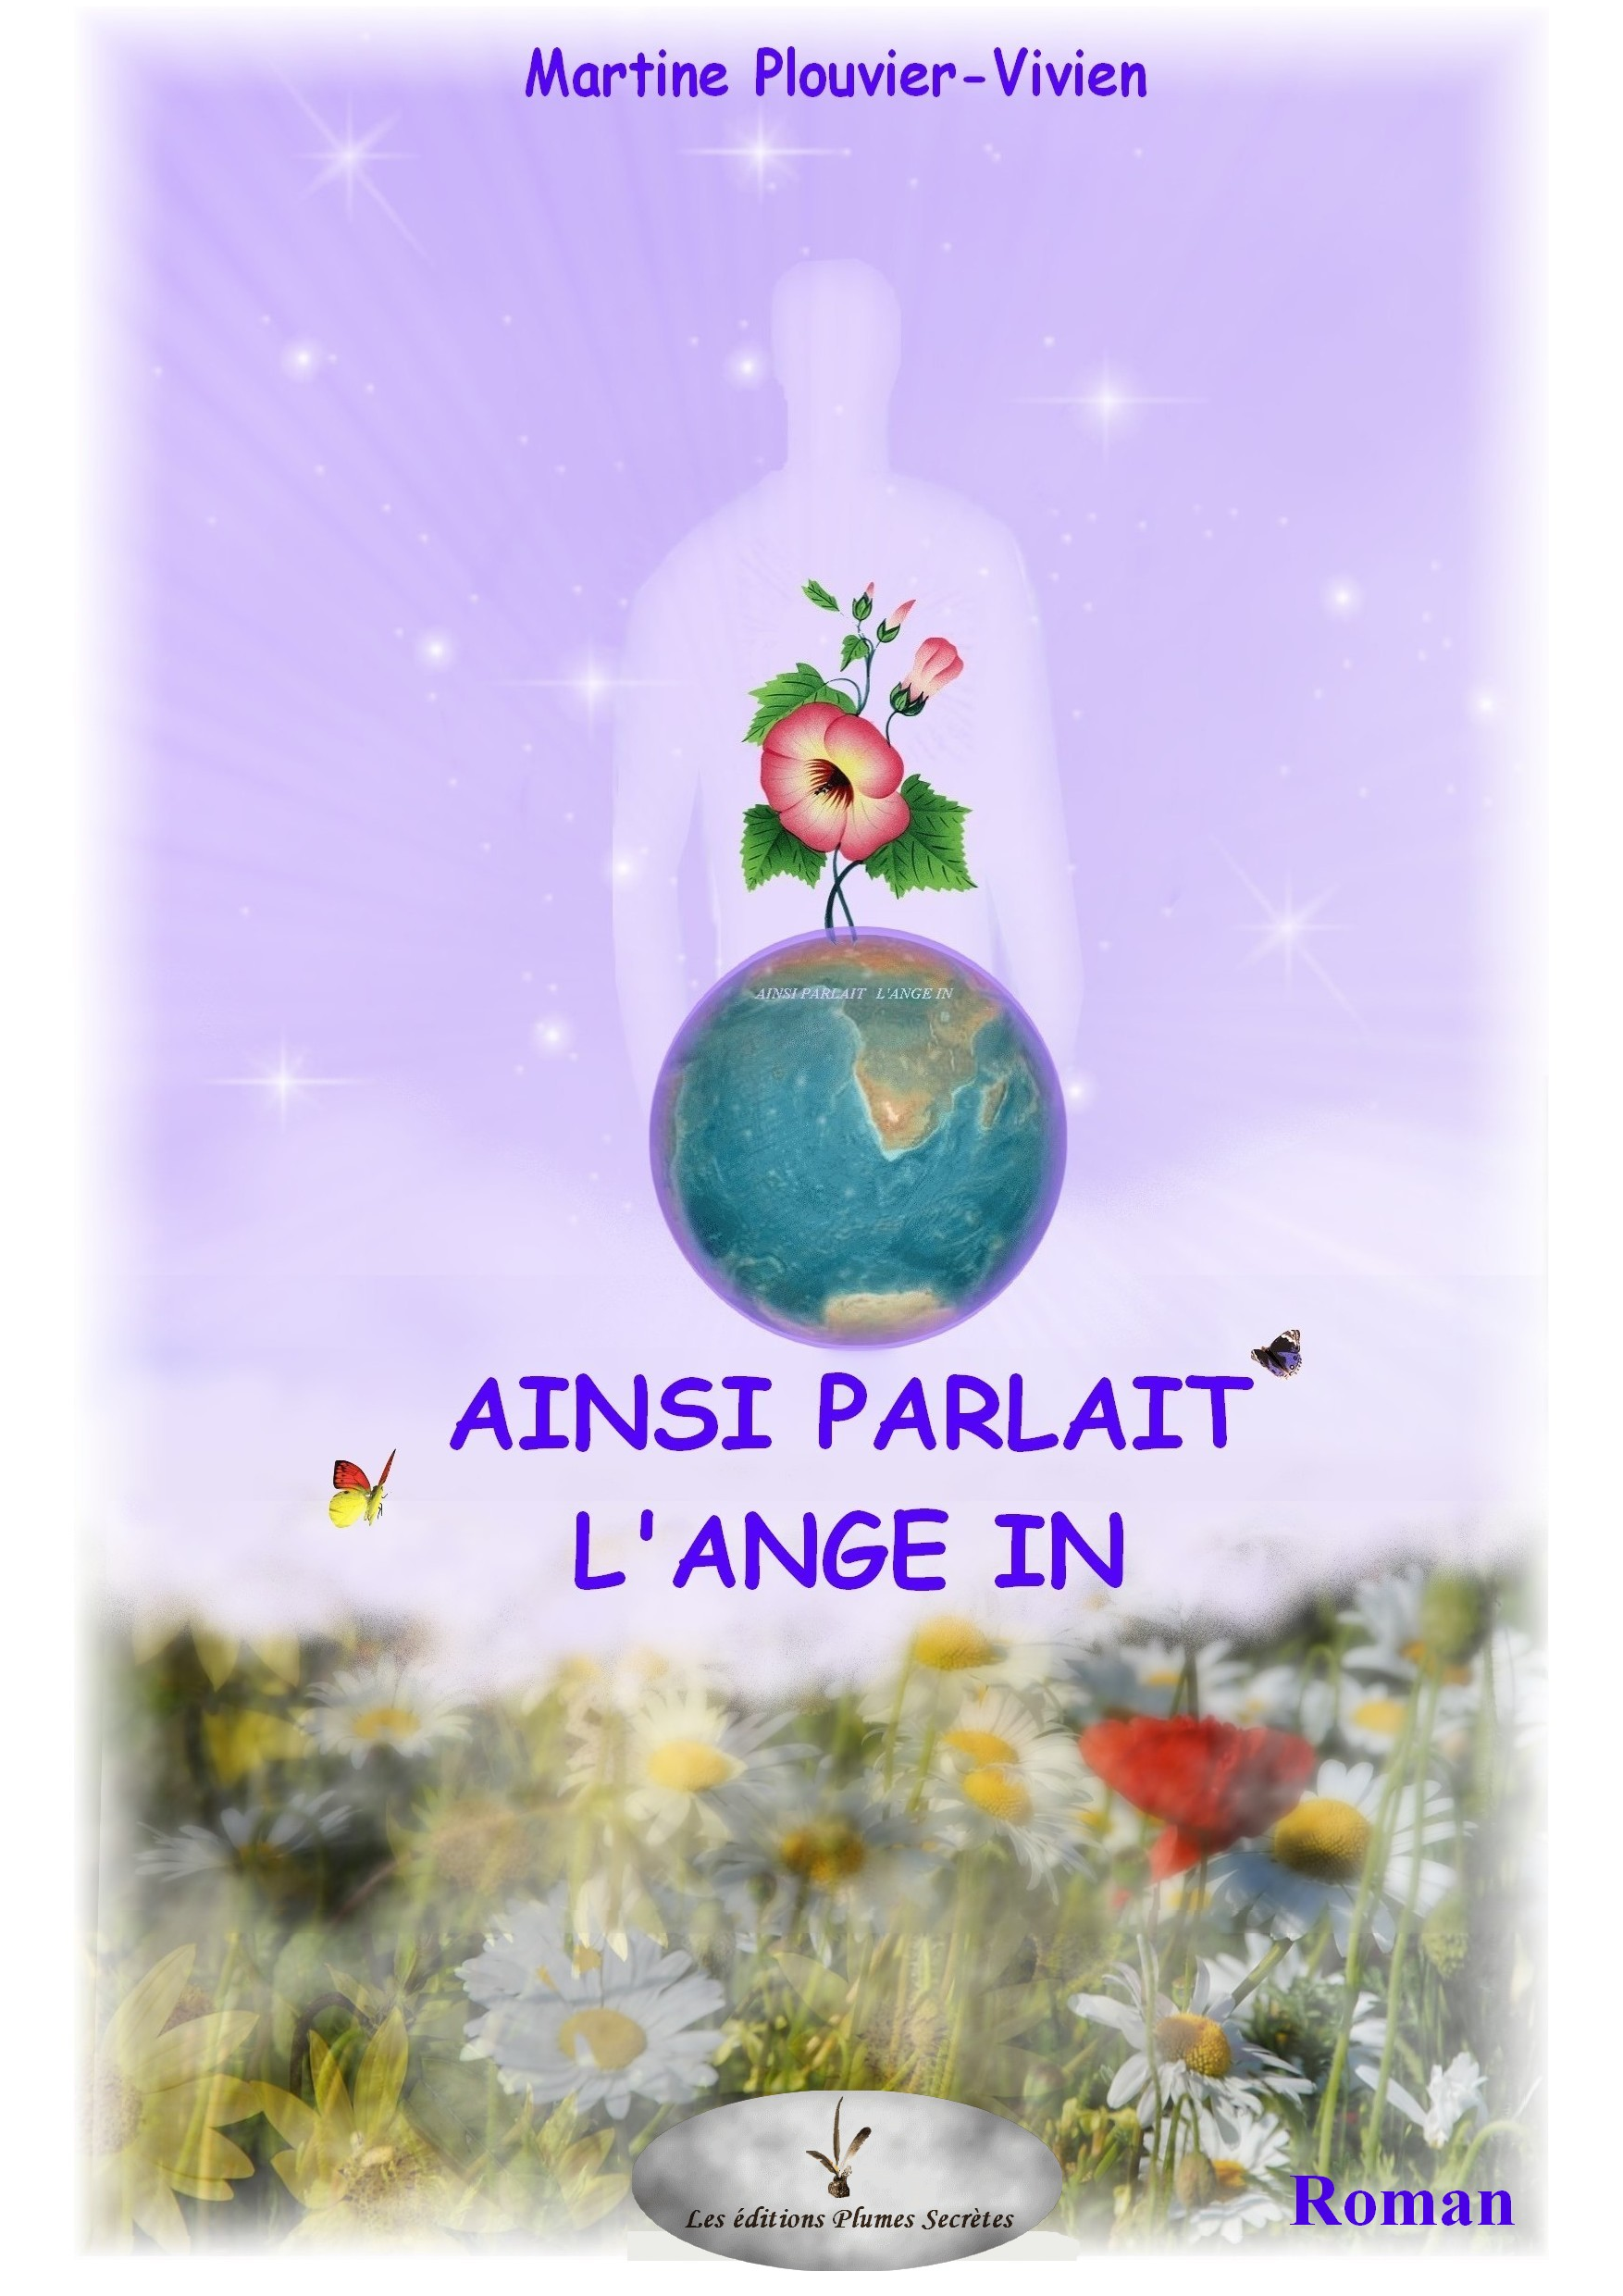 Ainsi parlait l'ange in'